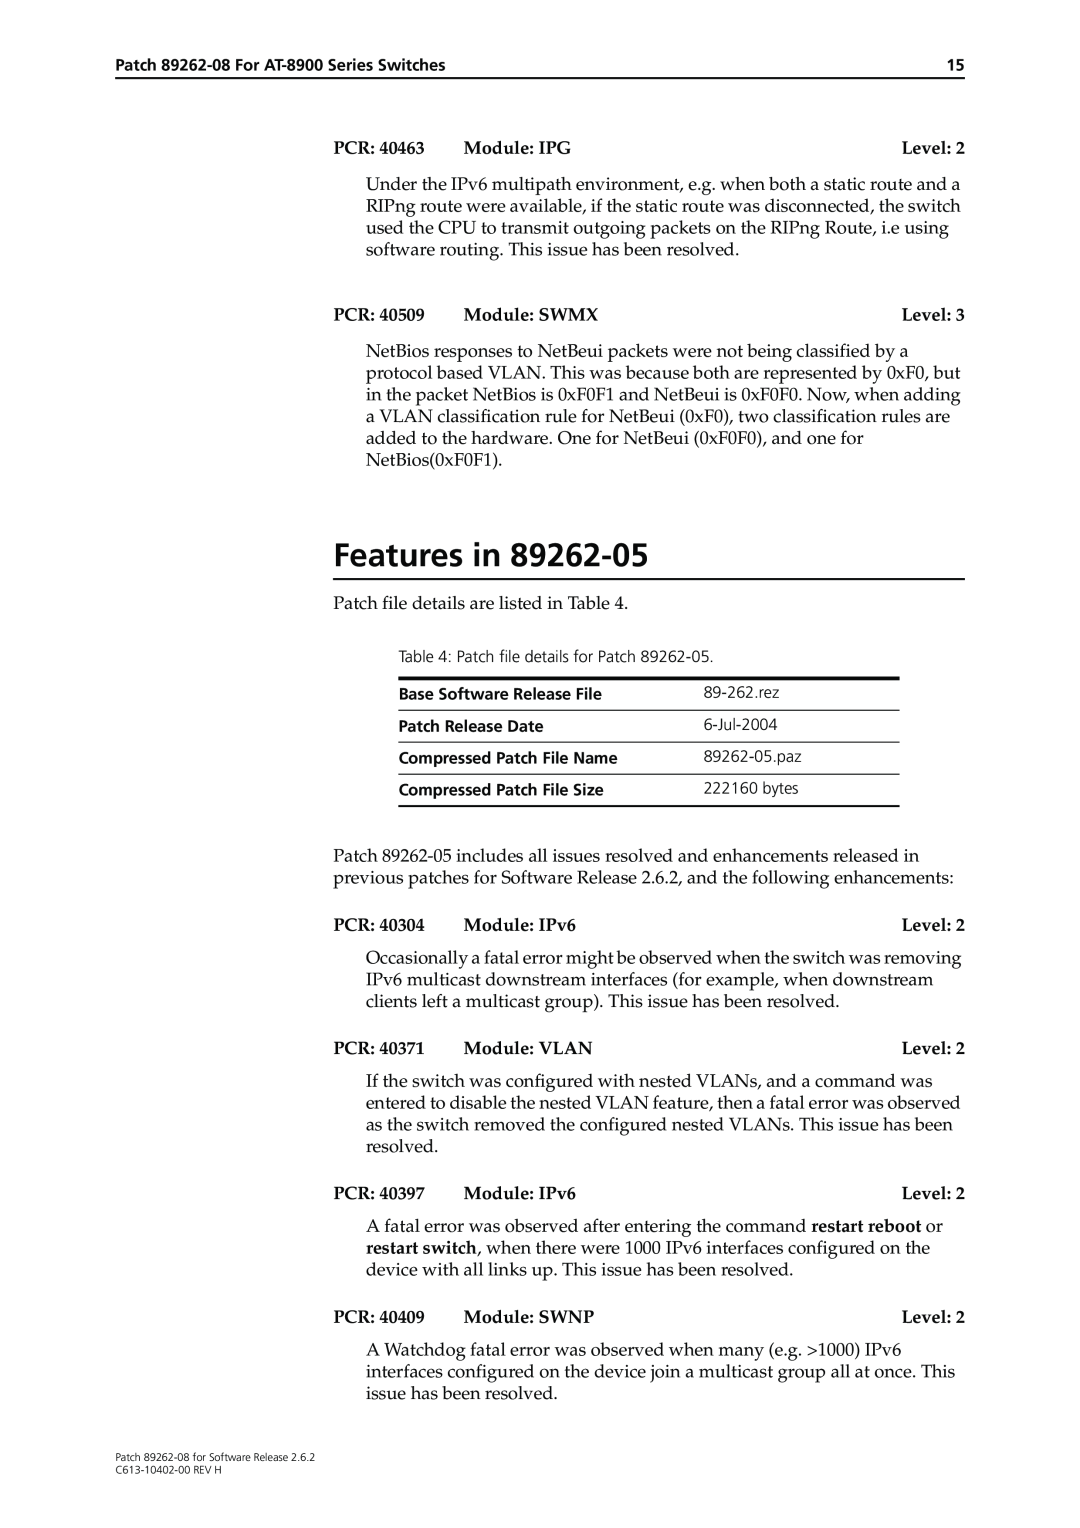 Allied Telesis Patch 89262-08 manual Features in, Patch file details for Patch 